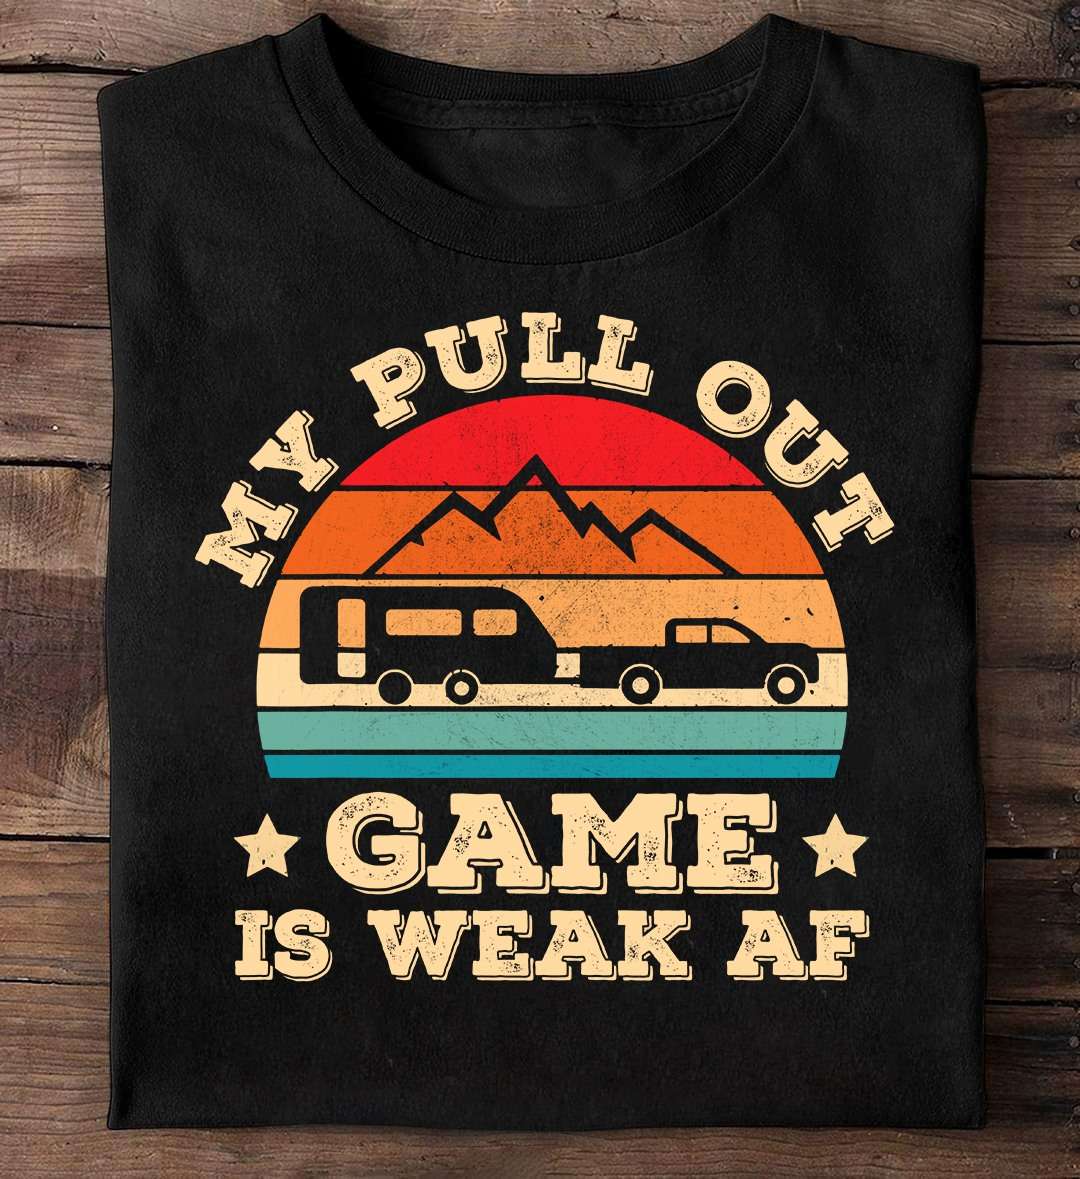 My pull out game is weak af - Pulling out camping car, recreational vehicle